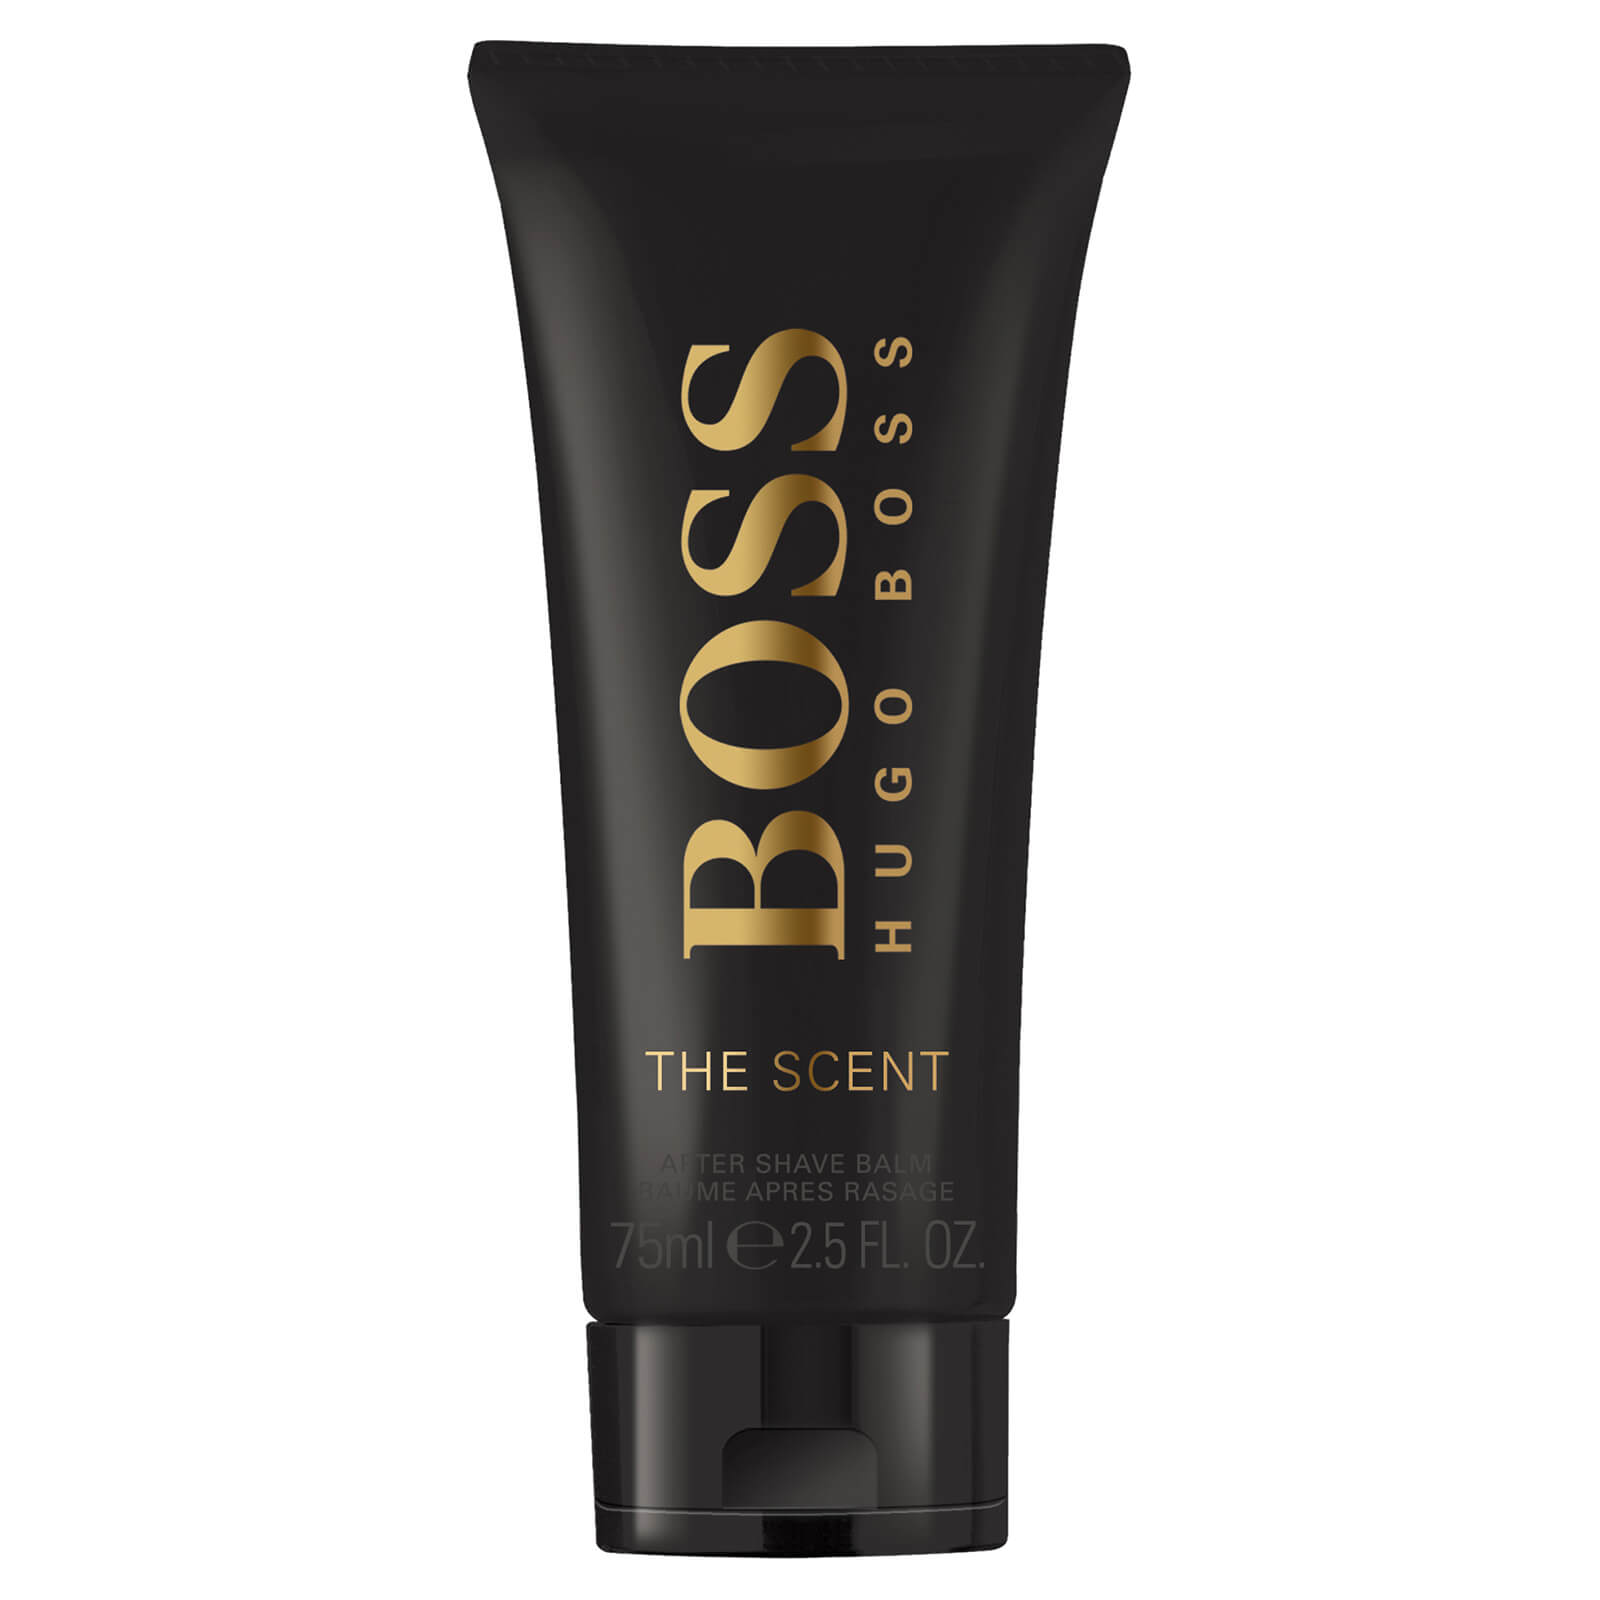 Hugo Boss The Scent After Shave Balm 